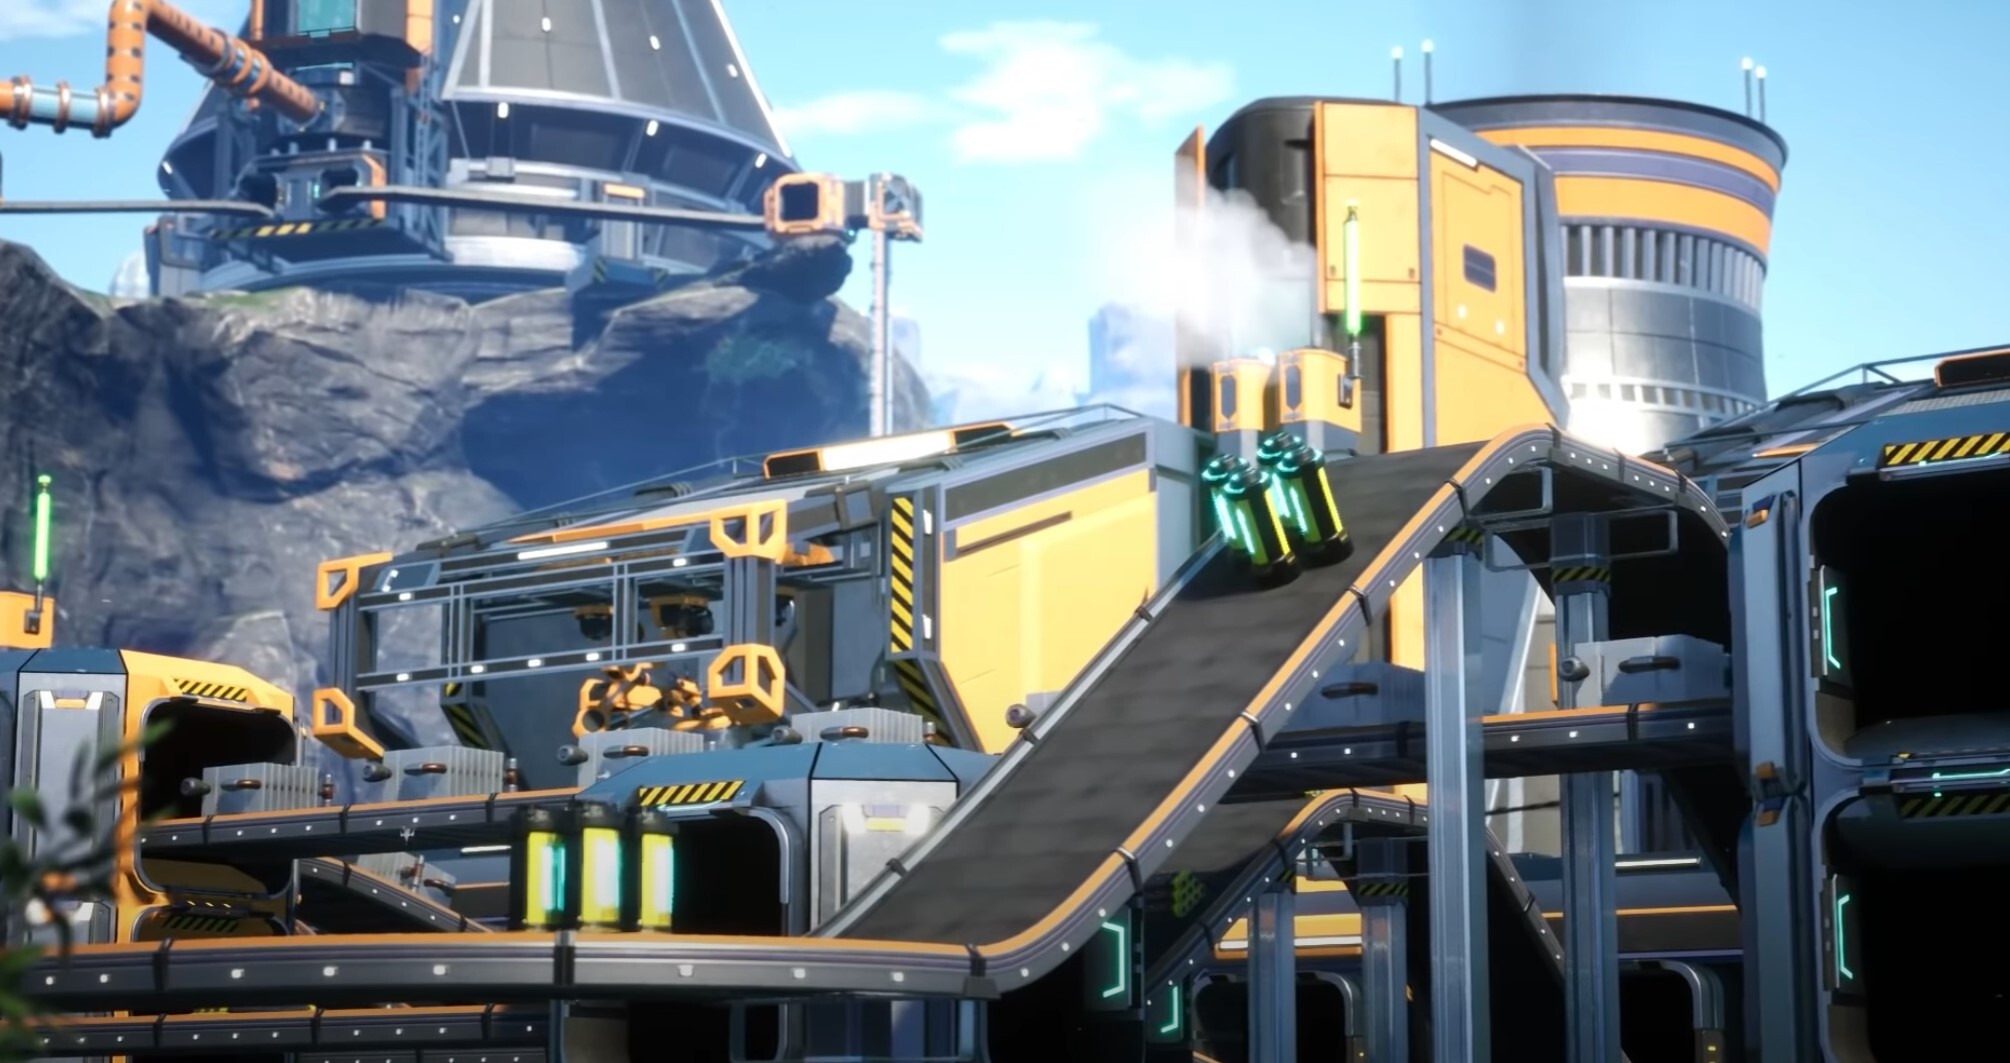  Satisfactory may get a final tech tier in a future update to wrap up its endgame 